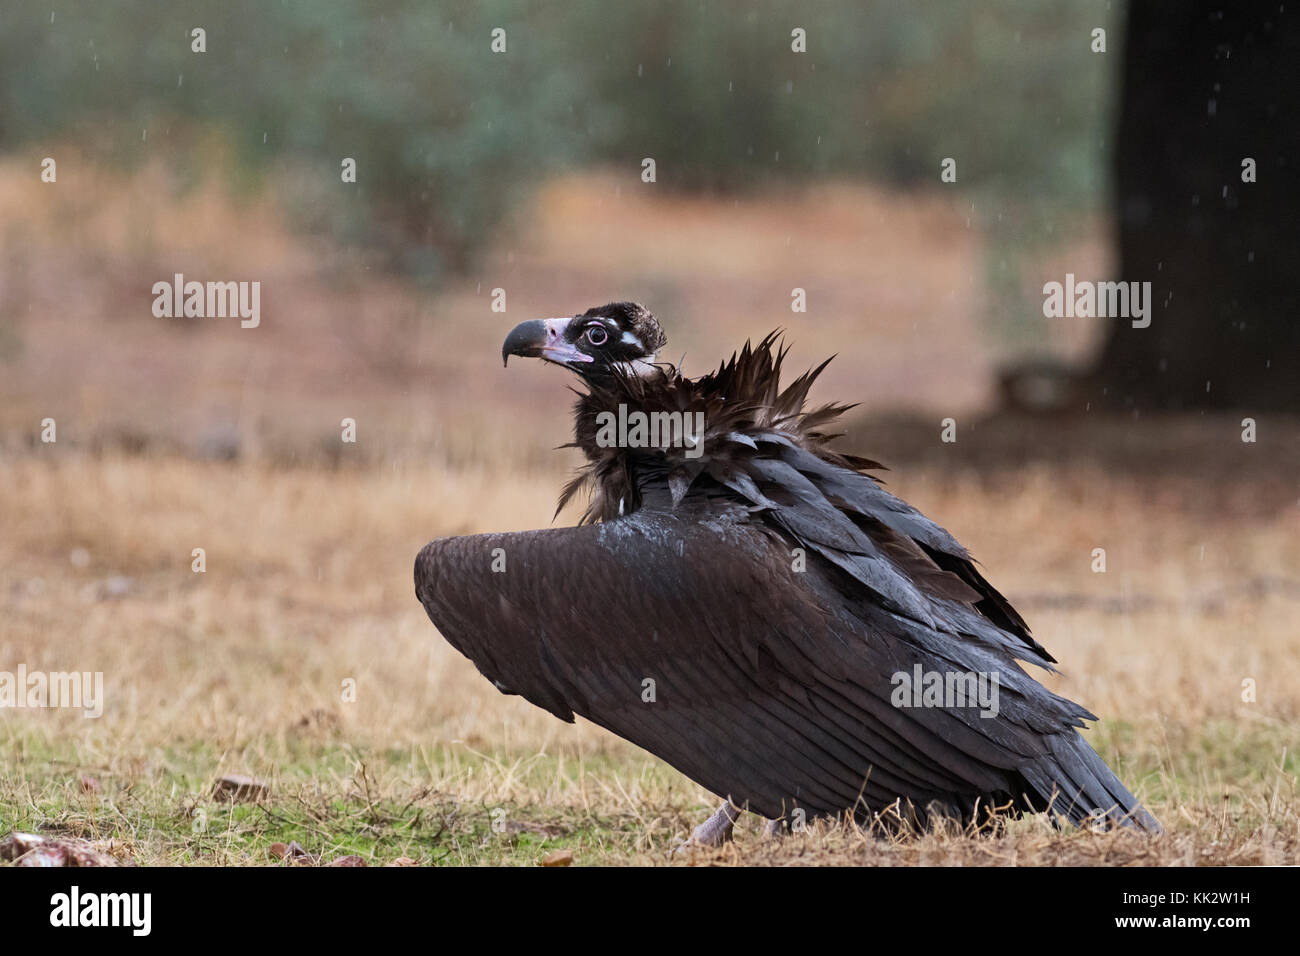 Extremadura, Spain. 28th November, 2017. the end to the long running drought in Extremadura, Spain. 28th Nov, 2017. as a Black Vulture bathes in the heavy rain near Caceres Credit: David Tipling Photo Library/Alamy Live News Stock Photo